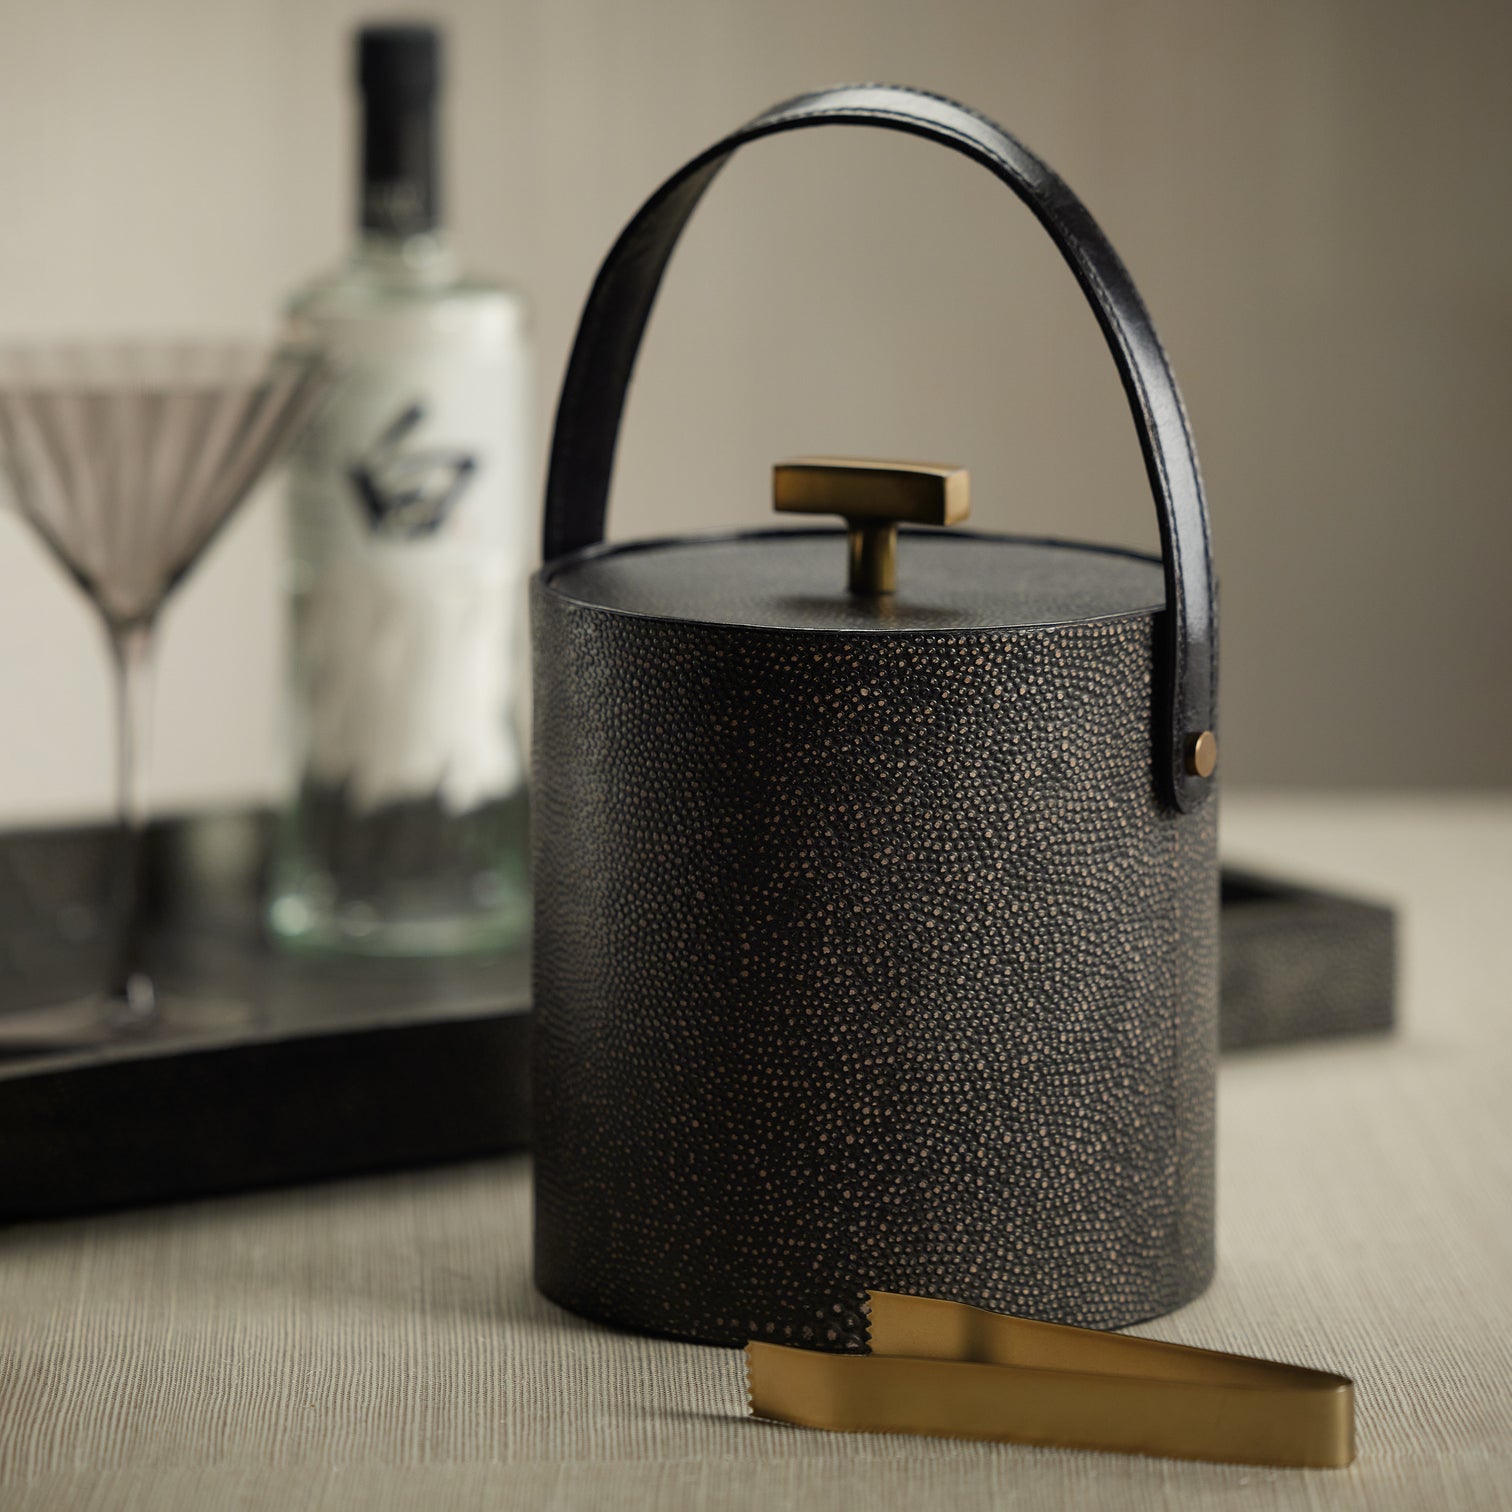 Nika Shagreen Leather Ice Bucket with Gold Metal Ice Tong